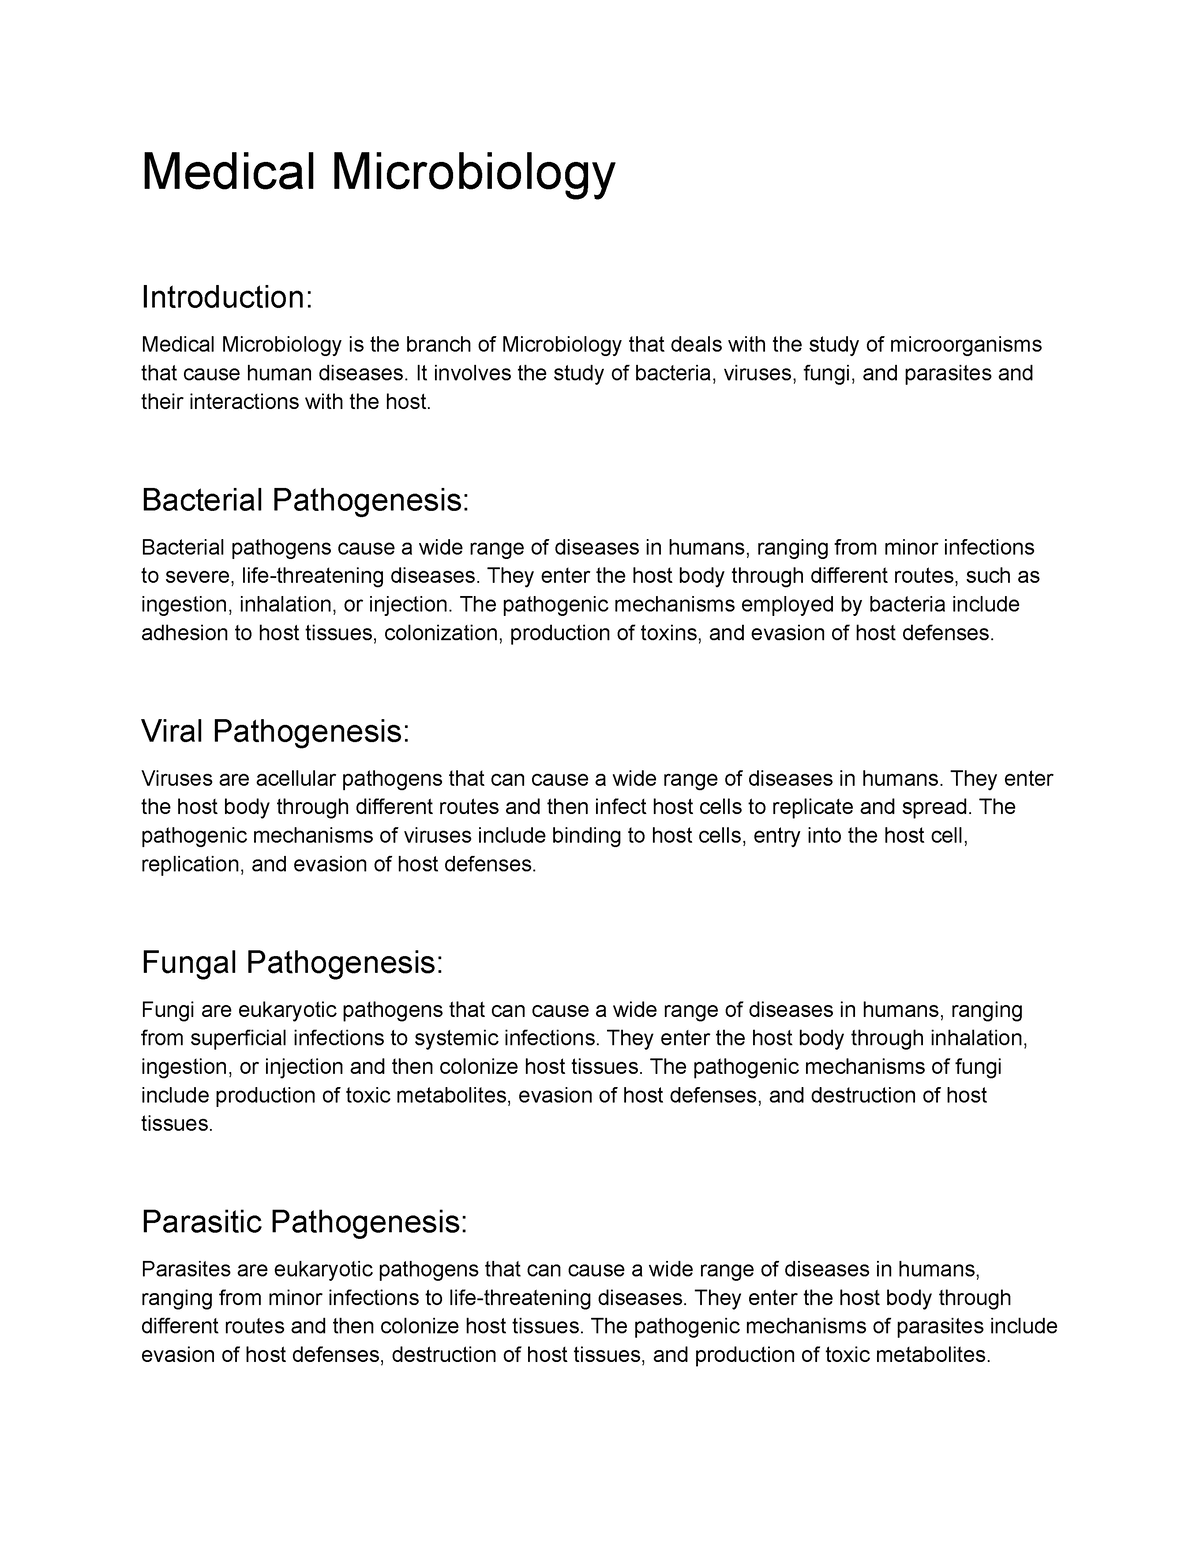 microbiology dissertation examples